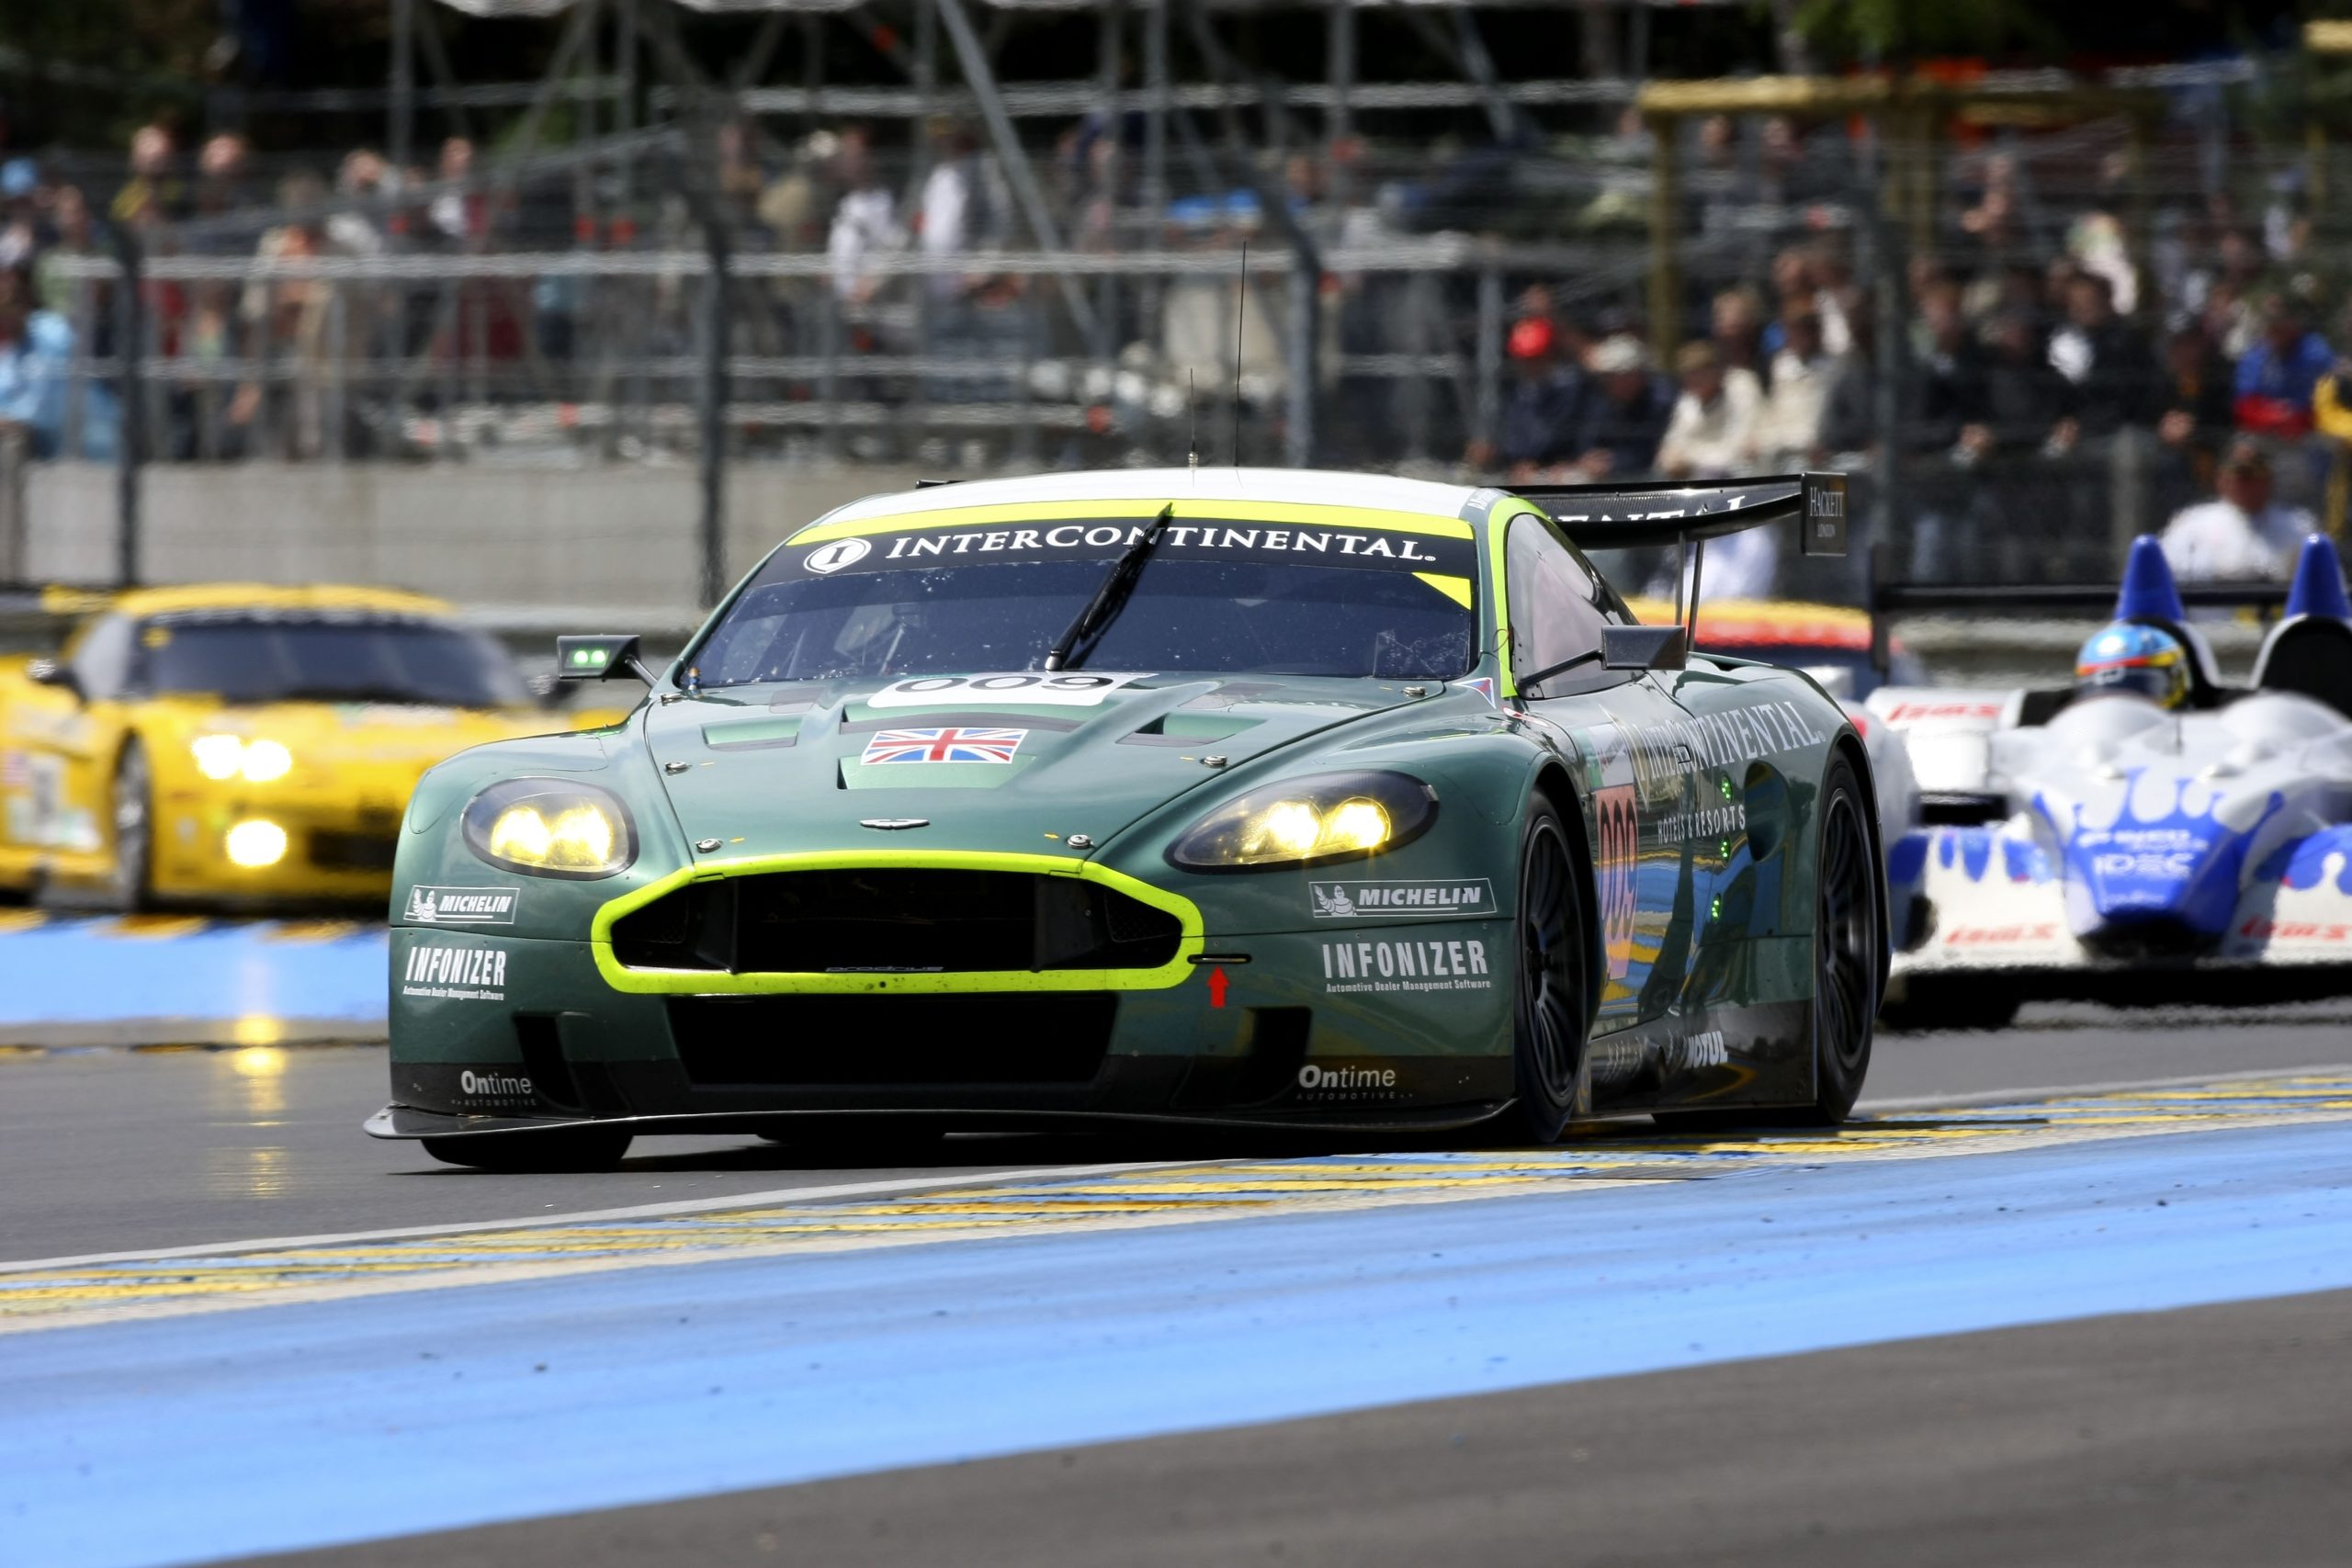 aston martin, le mans, motorsport, valkyrie, aston martin to race for outright le mans victory with valkyrie amr pro hypercar